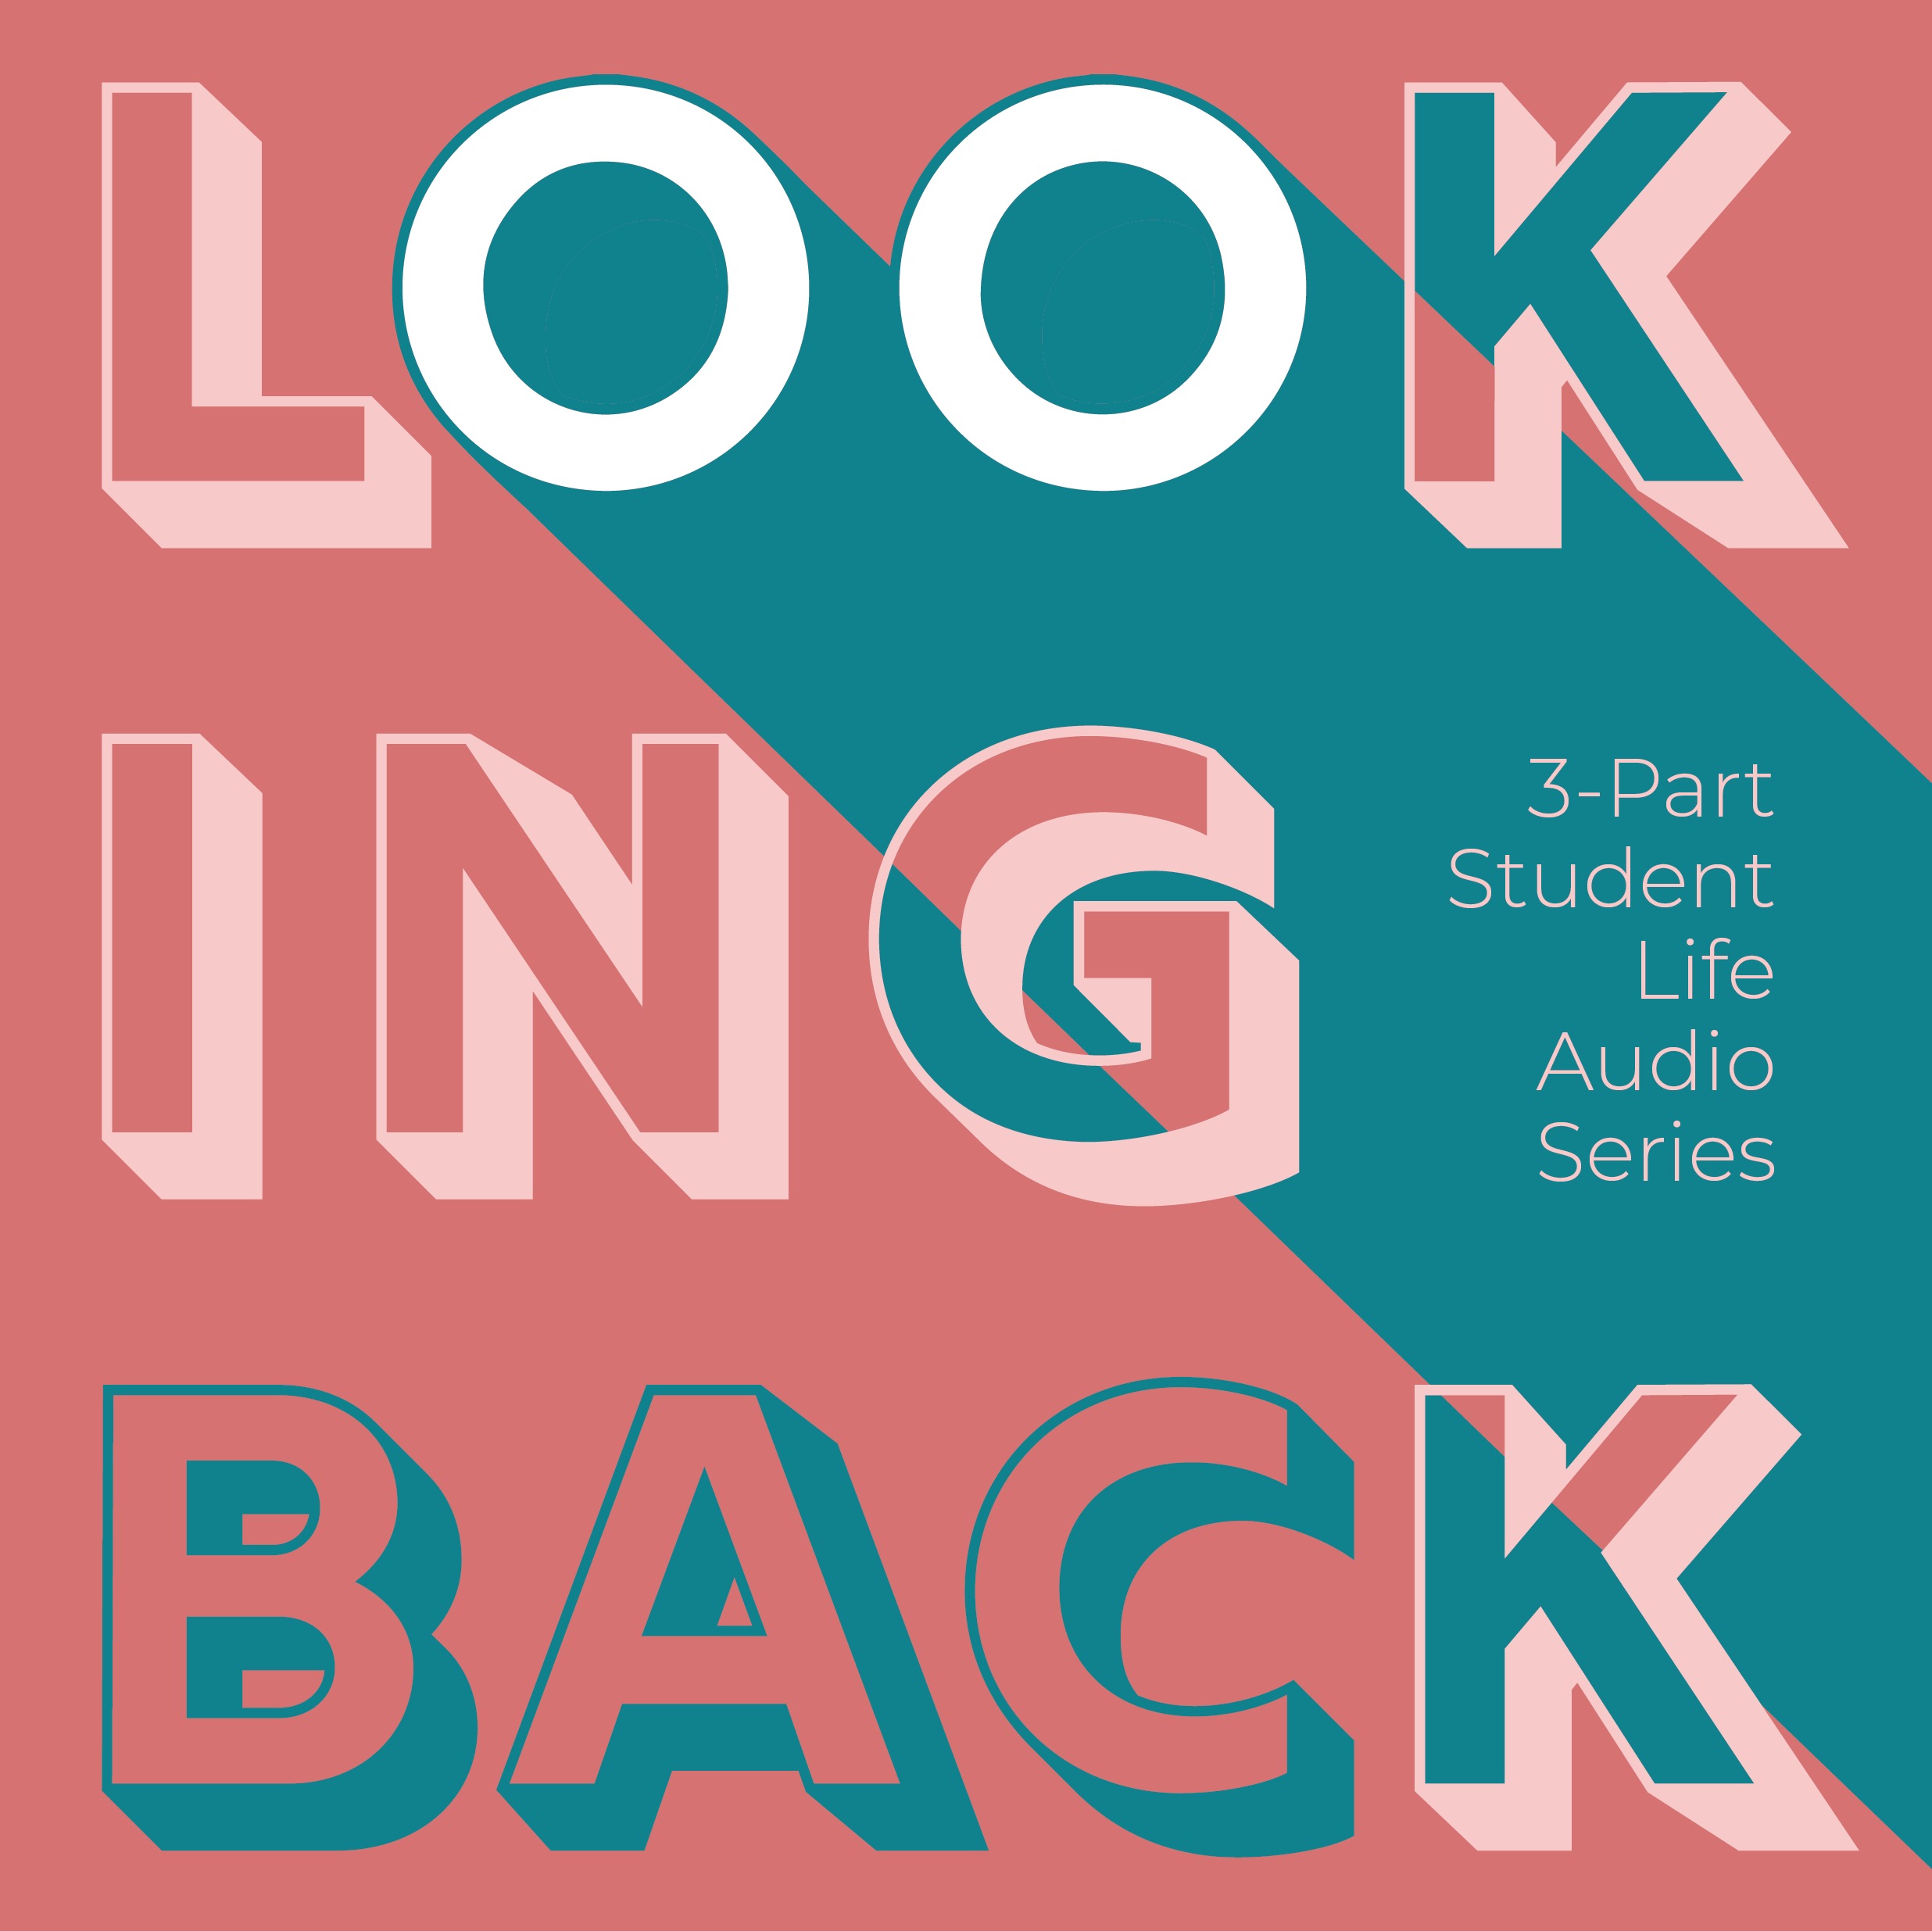 The words "Looking Back" spread across three horizontal lines in red and green colors. On the right side, smaller green text reads "3-Part Student Life Audio Series." A green trapezoid from the right side of the screen makes the two Os in the word "Look" appear like eyes.